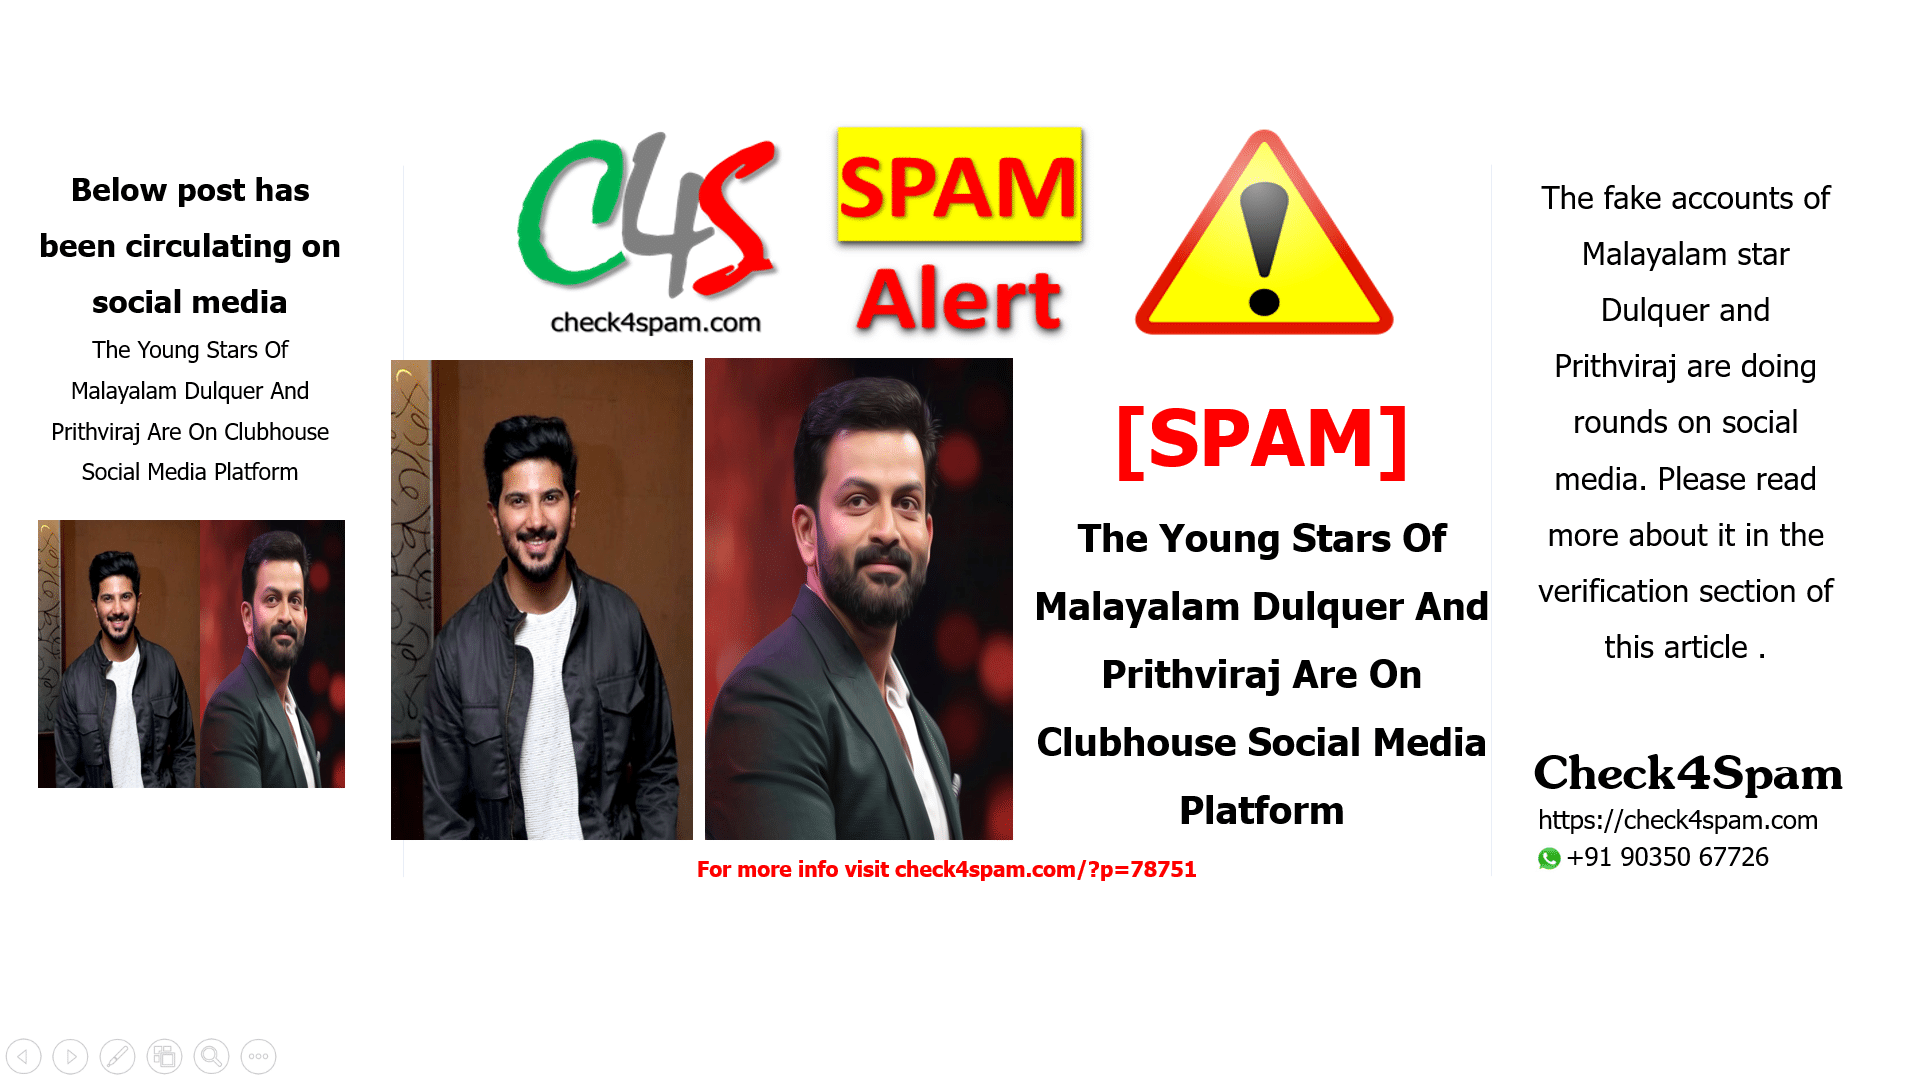 The Young Stars Of Malayalam Dulquer And Prithviraj Are On Clubhouse Social Media Platform